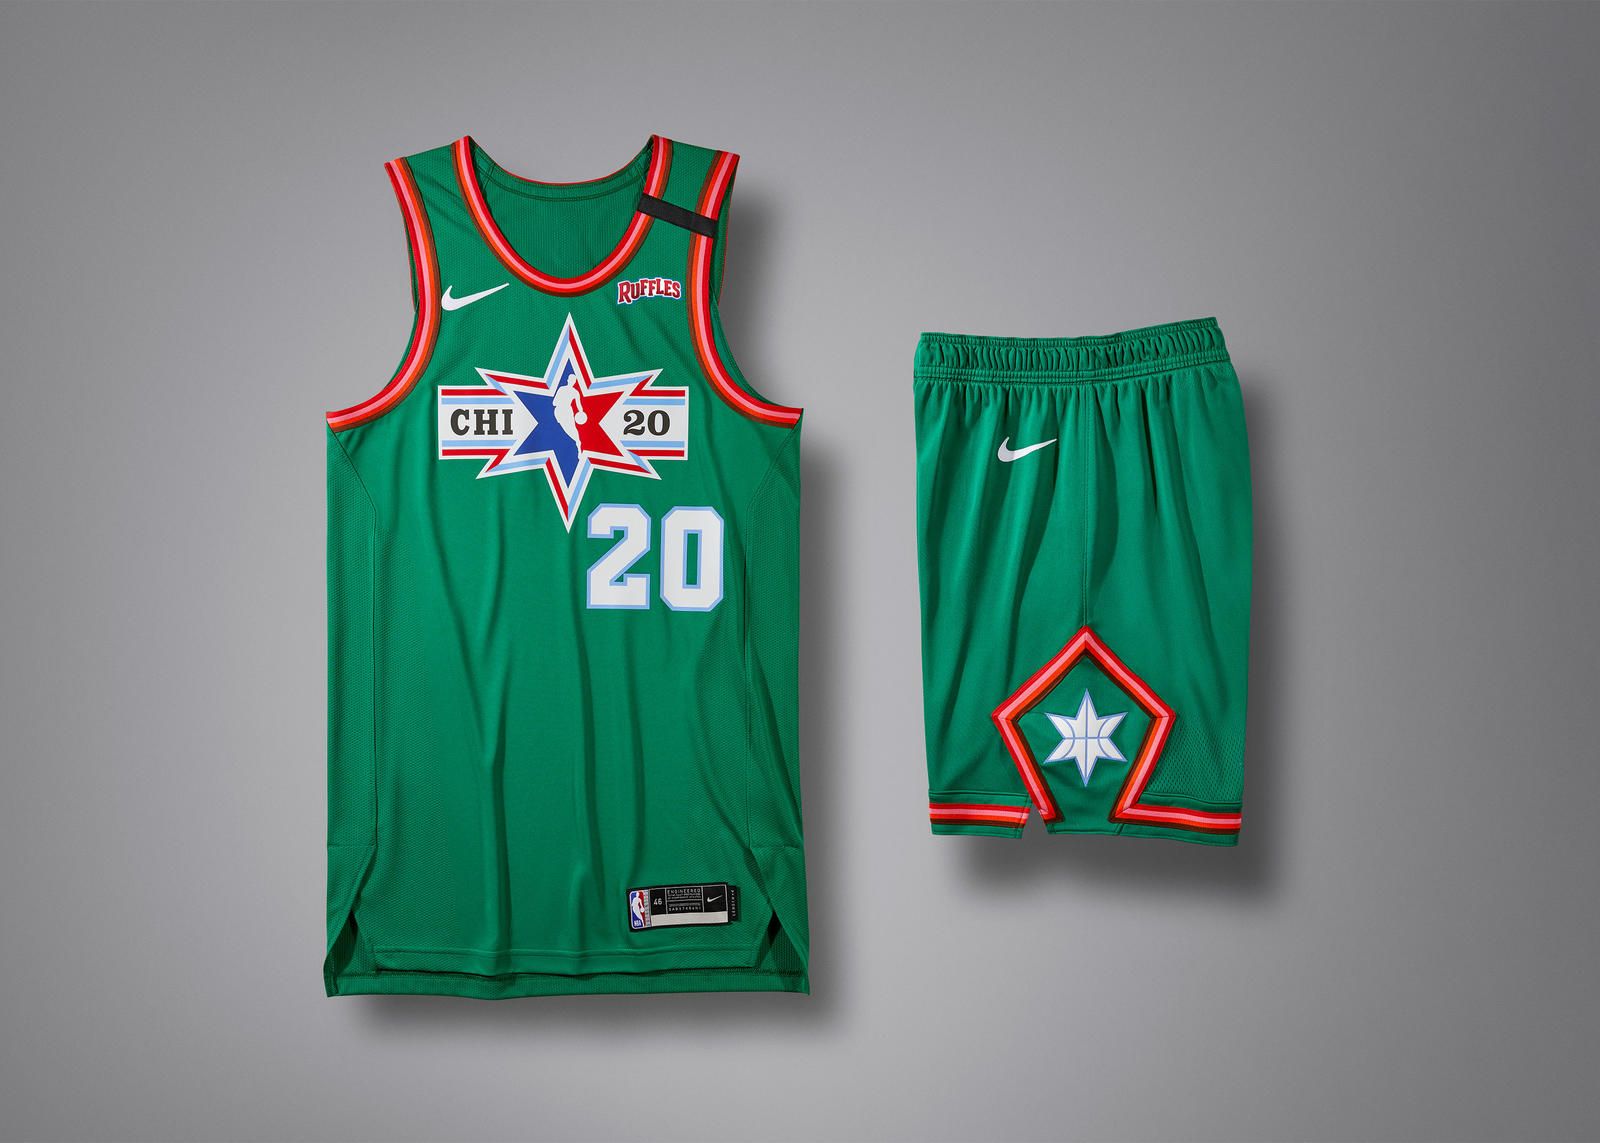 NBA AllStar Game uniforms inspired by Chicago Transit Line